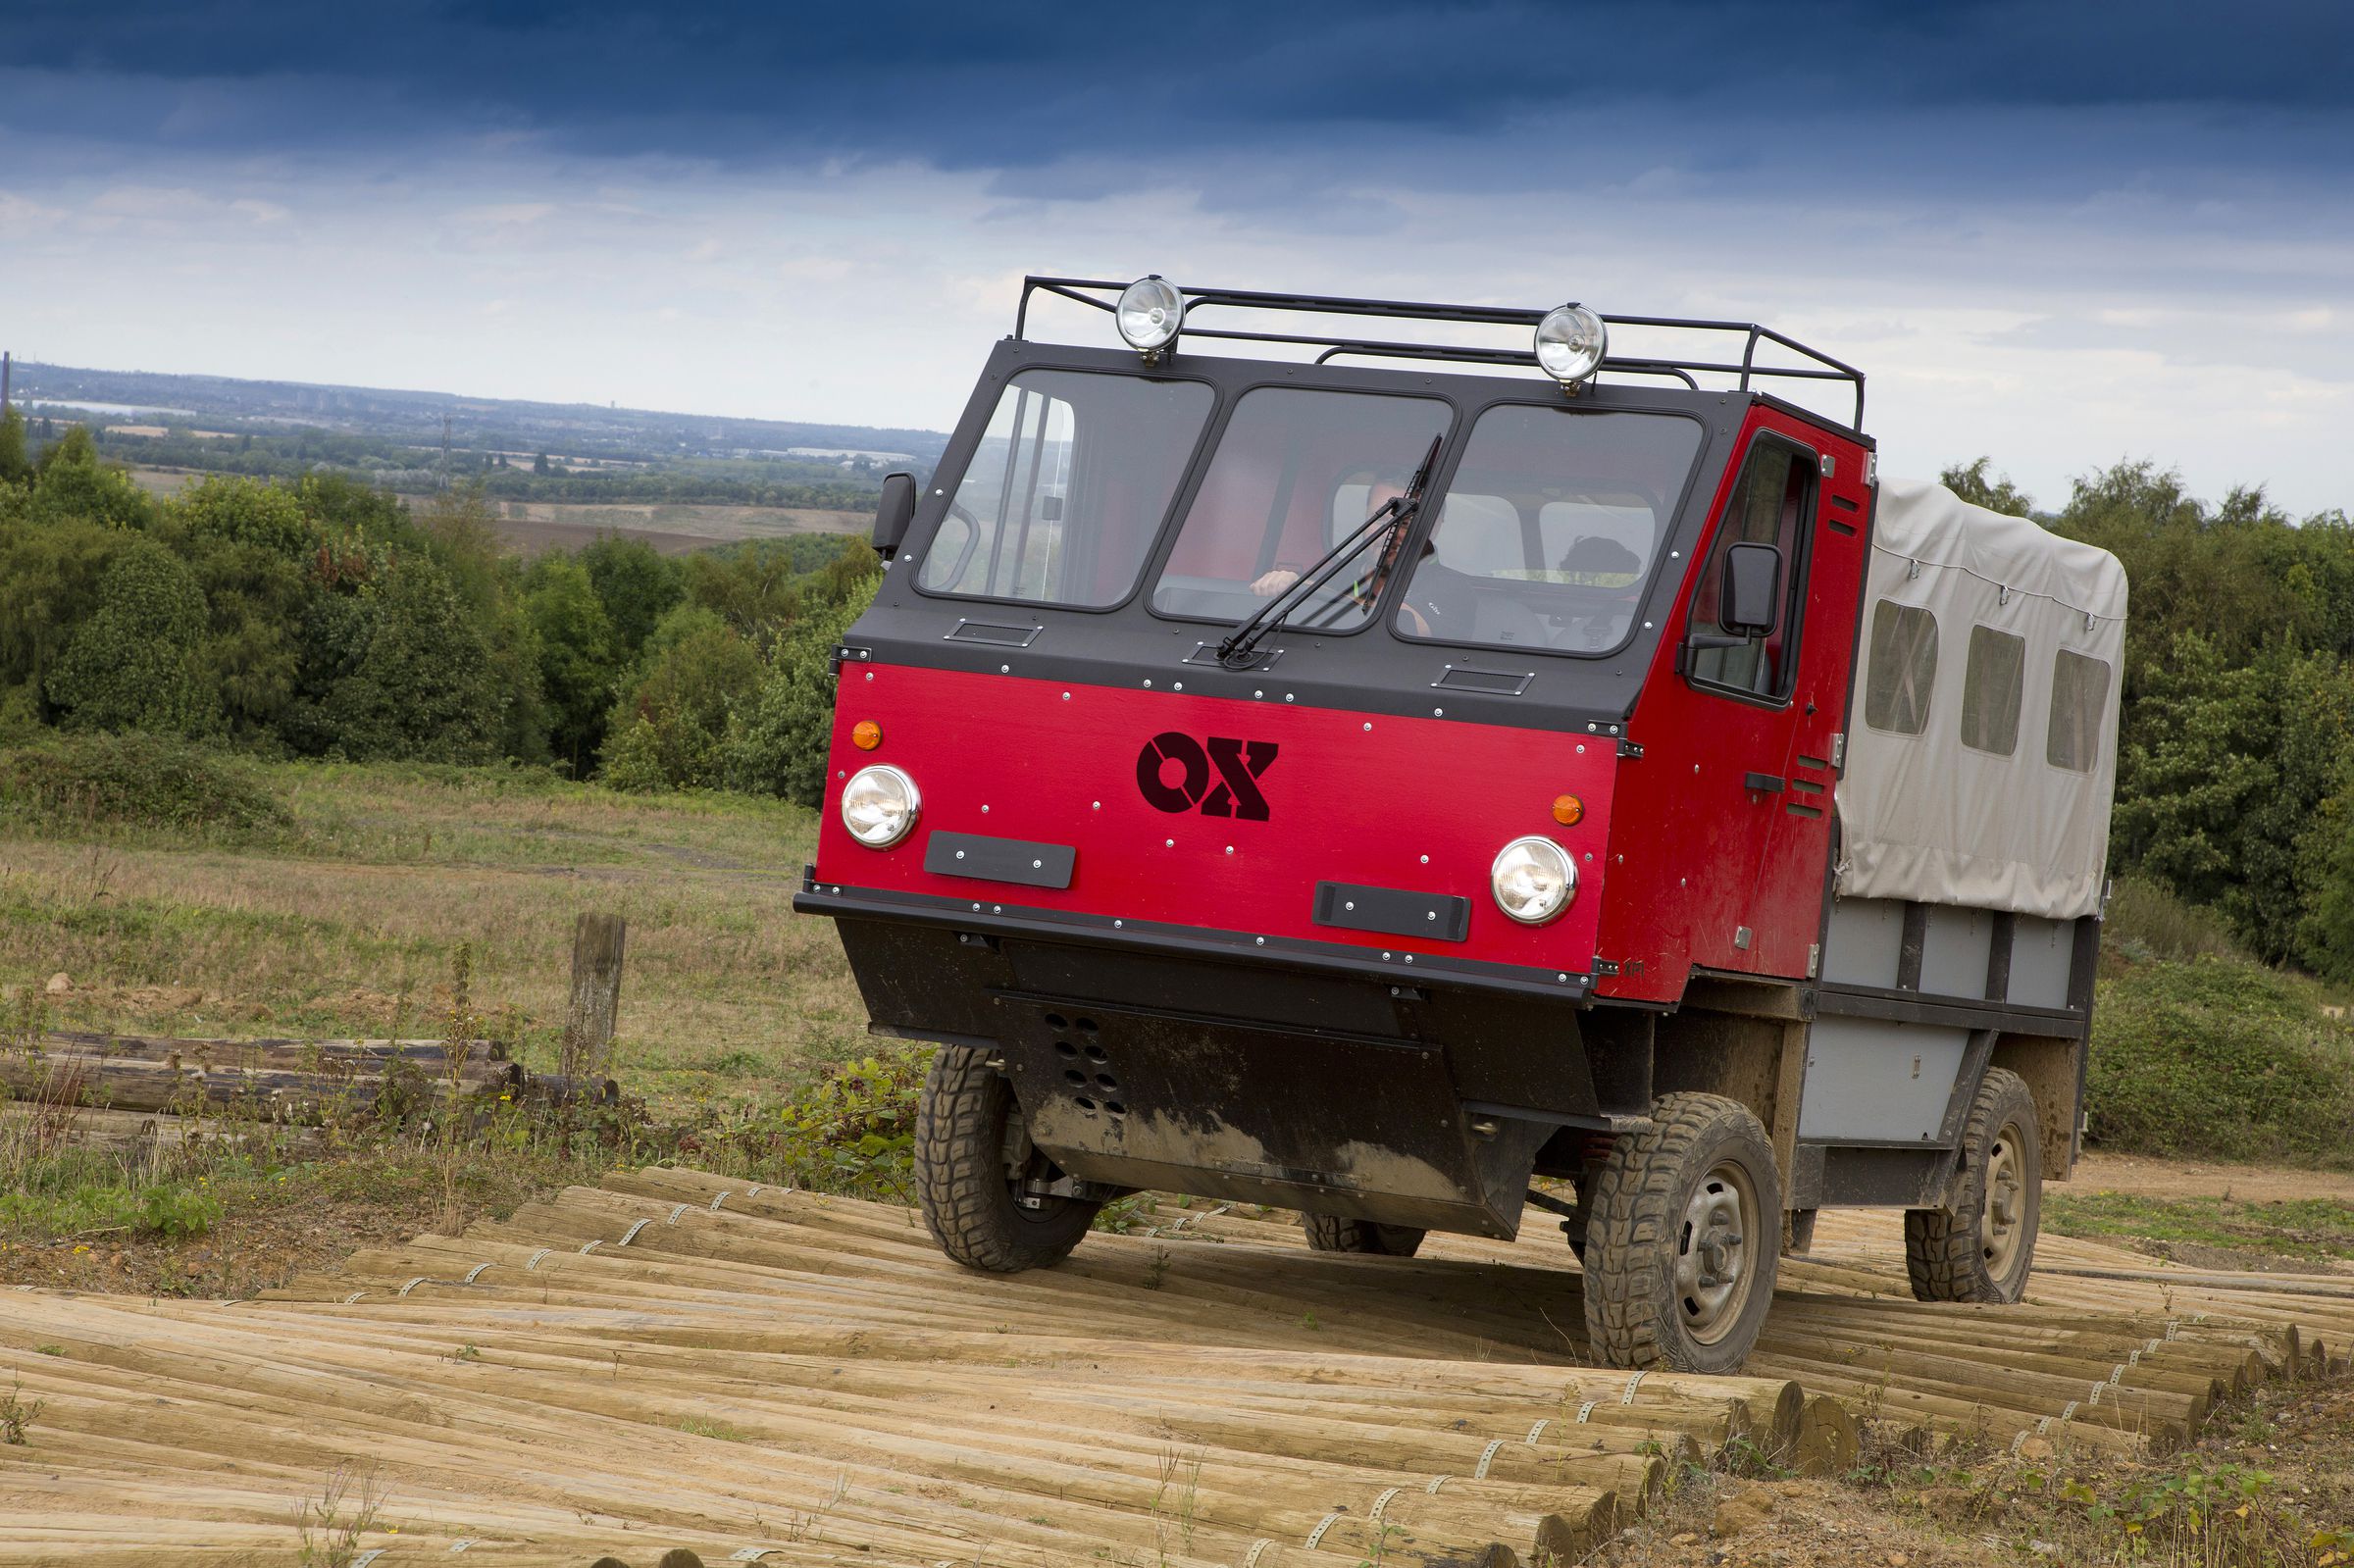 Ox flat-packed truck gallery